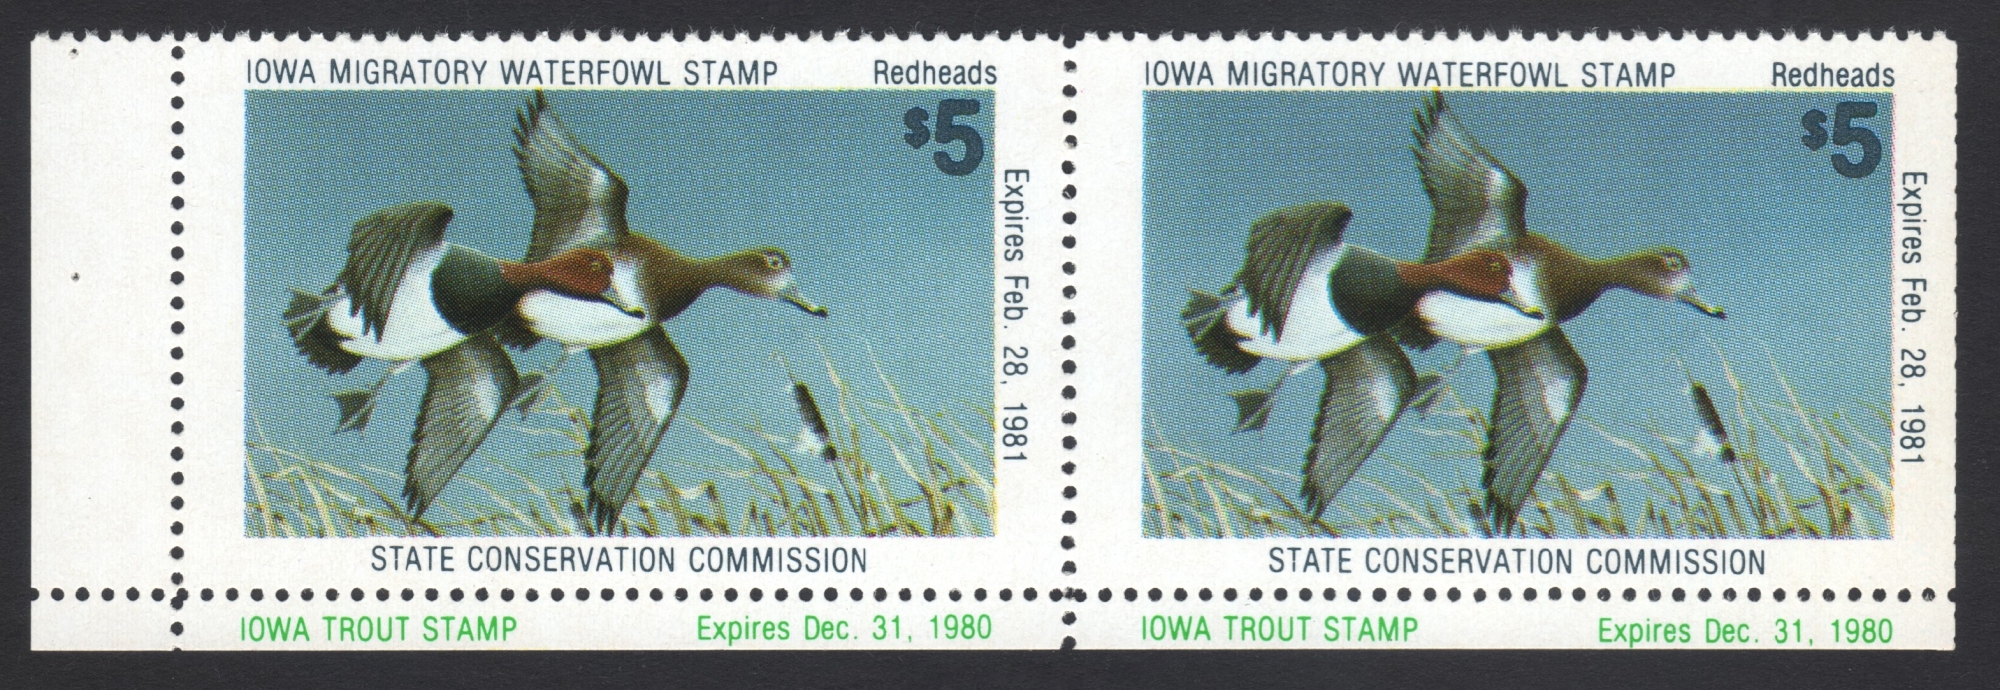 1980 Iowa Duck Pair with Trout Inscription at Bottom